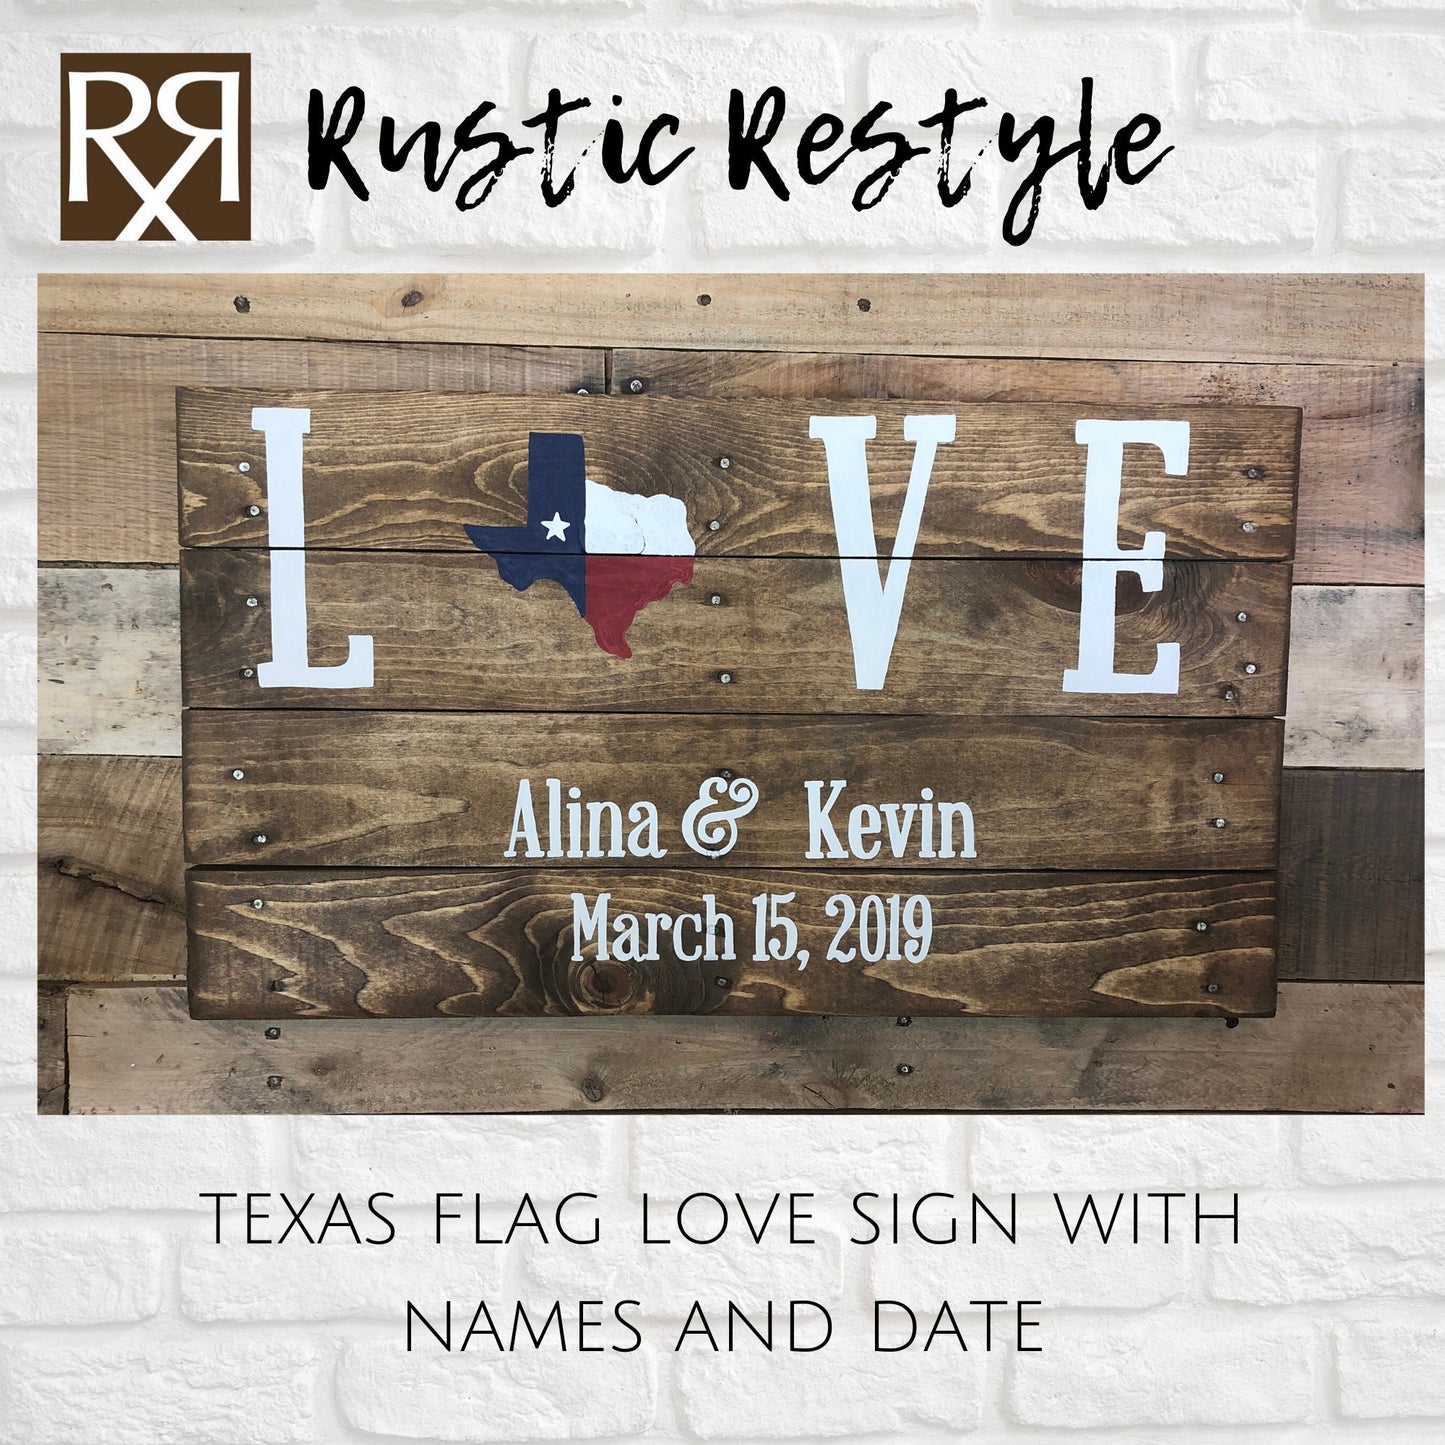 Personalized Texas flag love sign- recycled pallet home decor- reclaimed wood signs- Texas Decor sign- recycled wood sign- rustic Texas sign